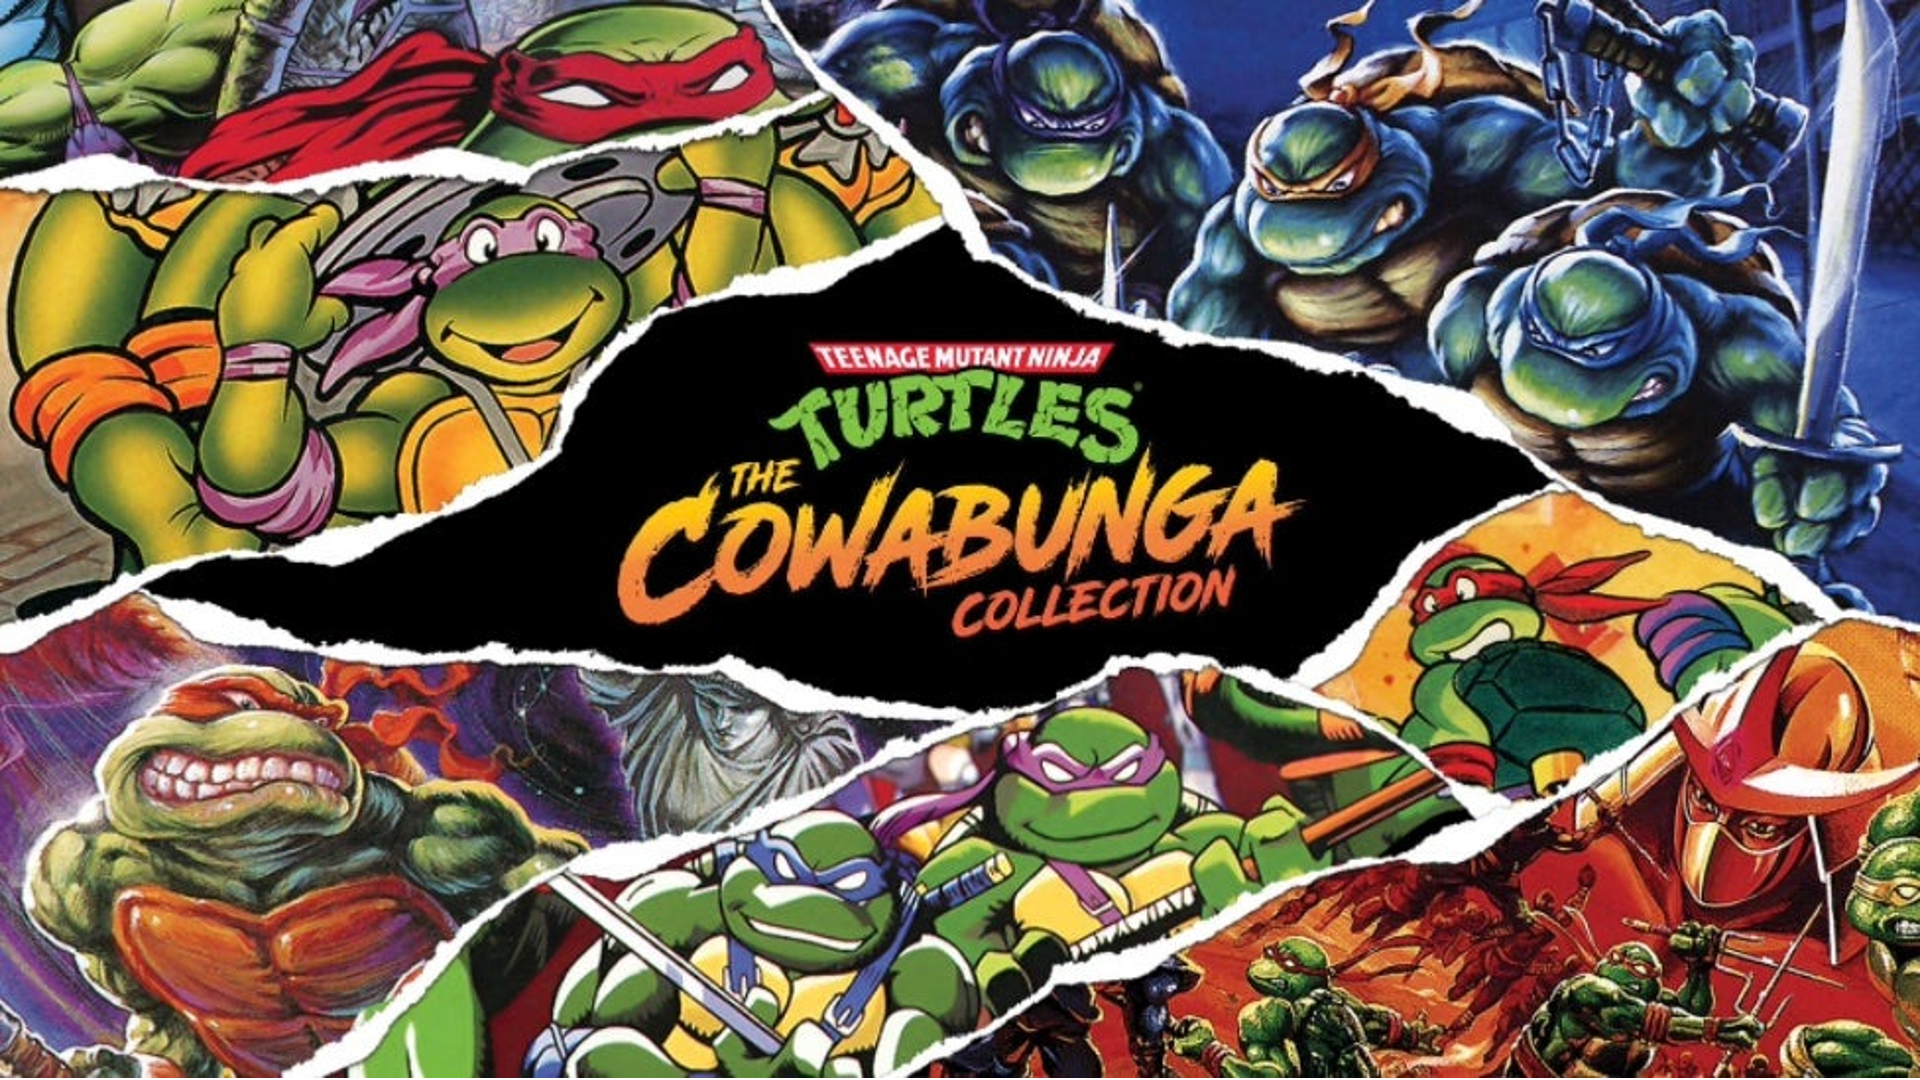 Games Included in The Cowabunga Collection: